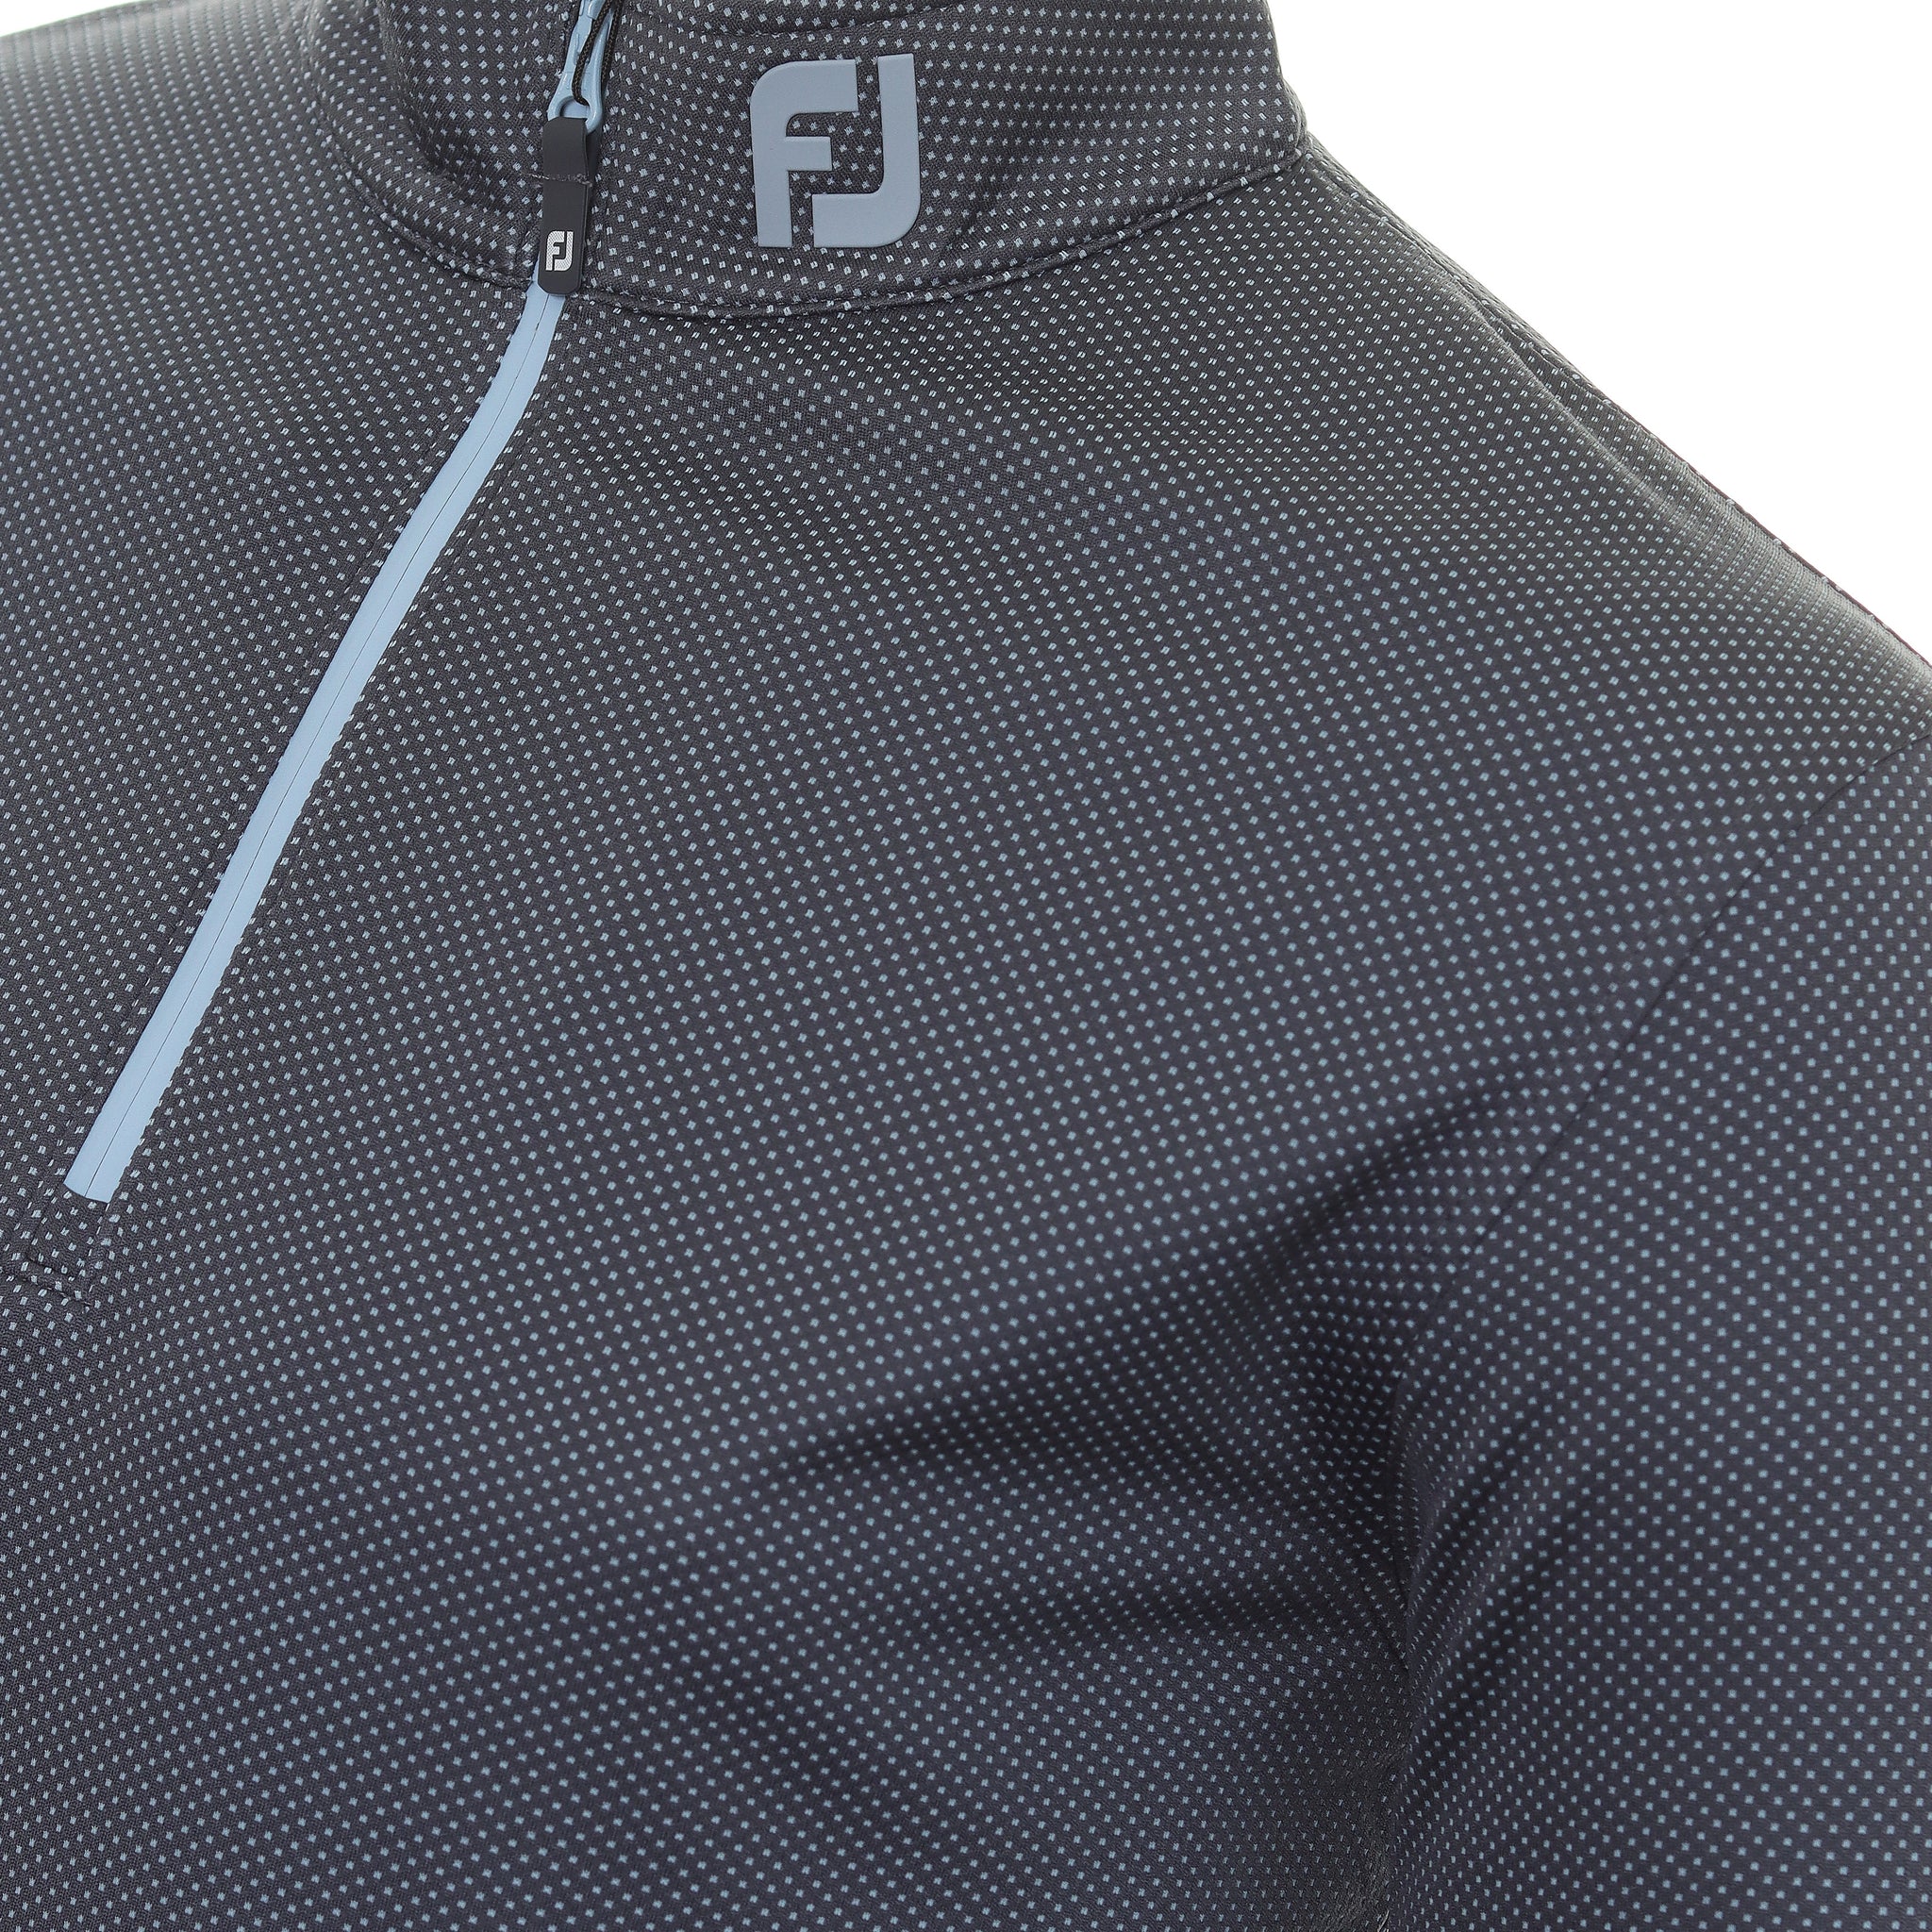 FootJoy ThermoSeries Mid Layer